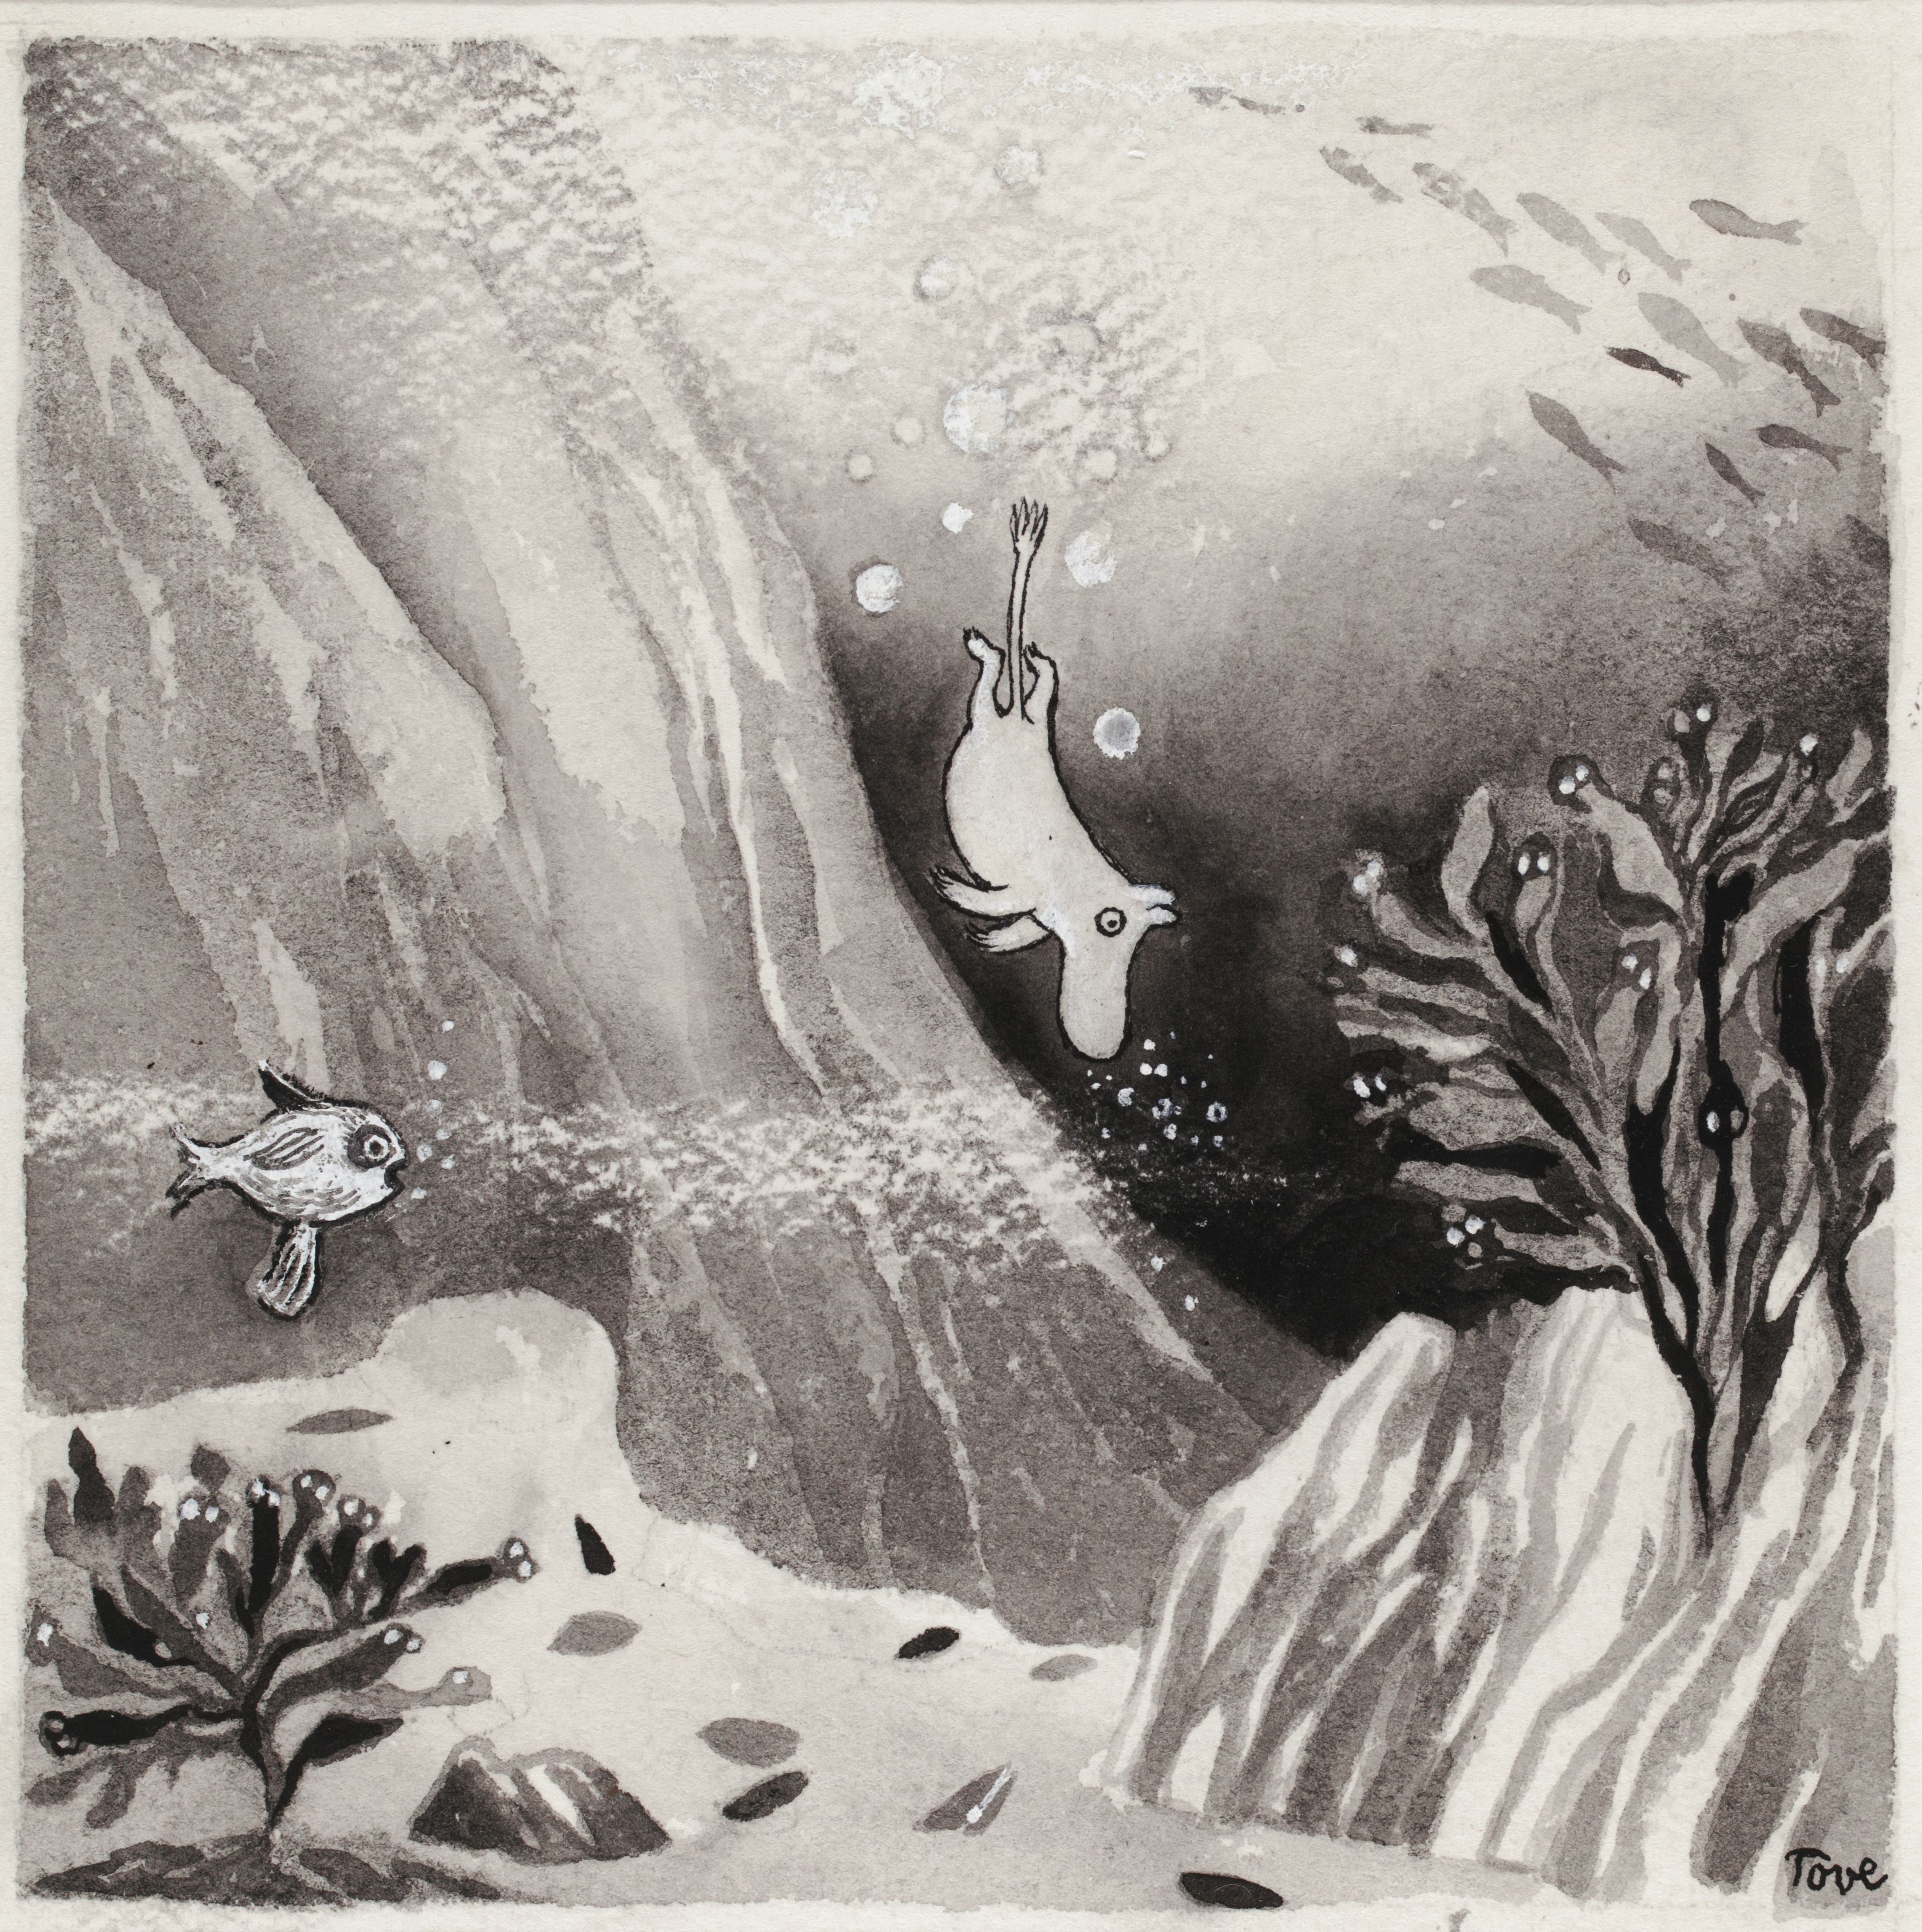 Tove Jansson, Illustration for the book Moominland Midwinter, c. 1956, scrape drawing on cardboard, 13 x 18.5 cm, Private Collec